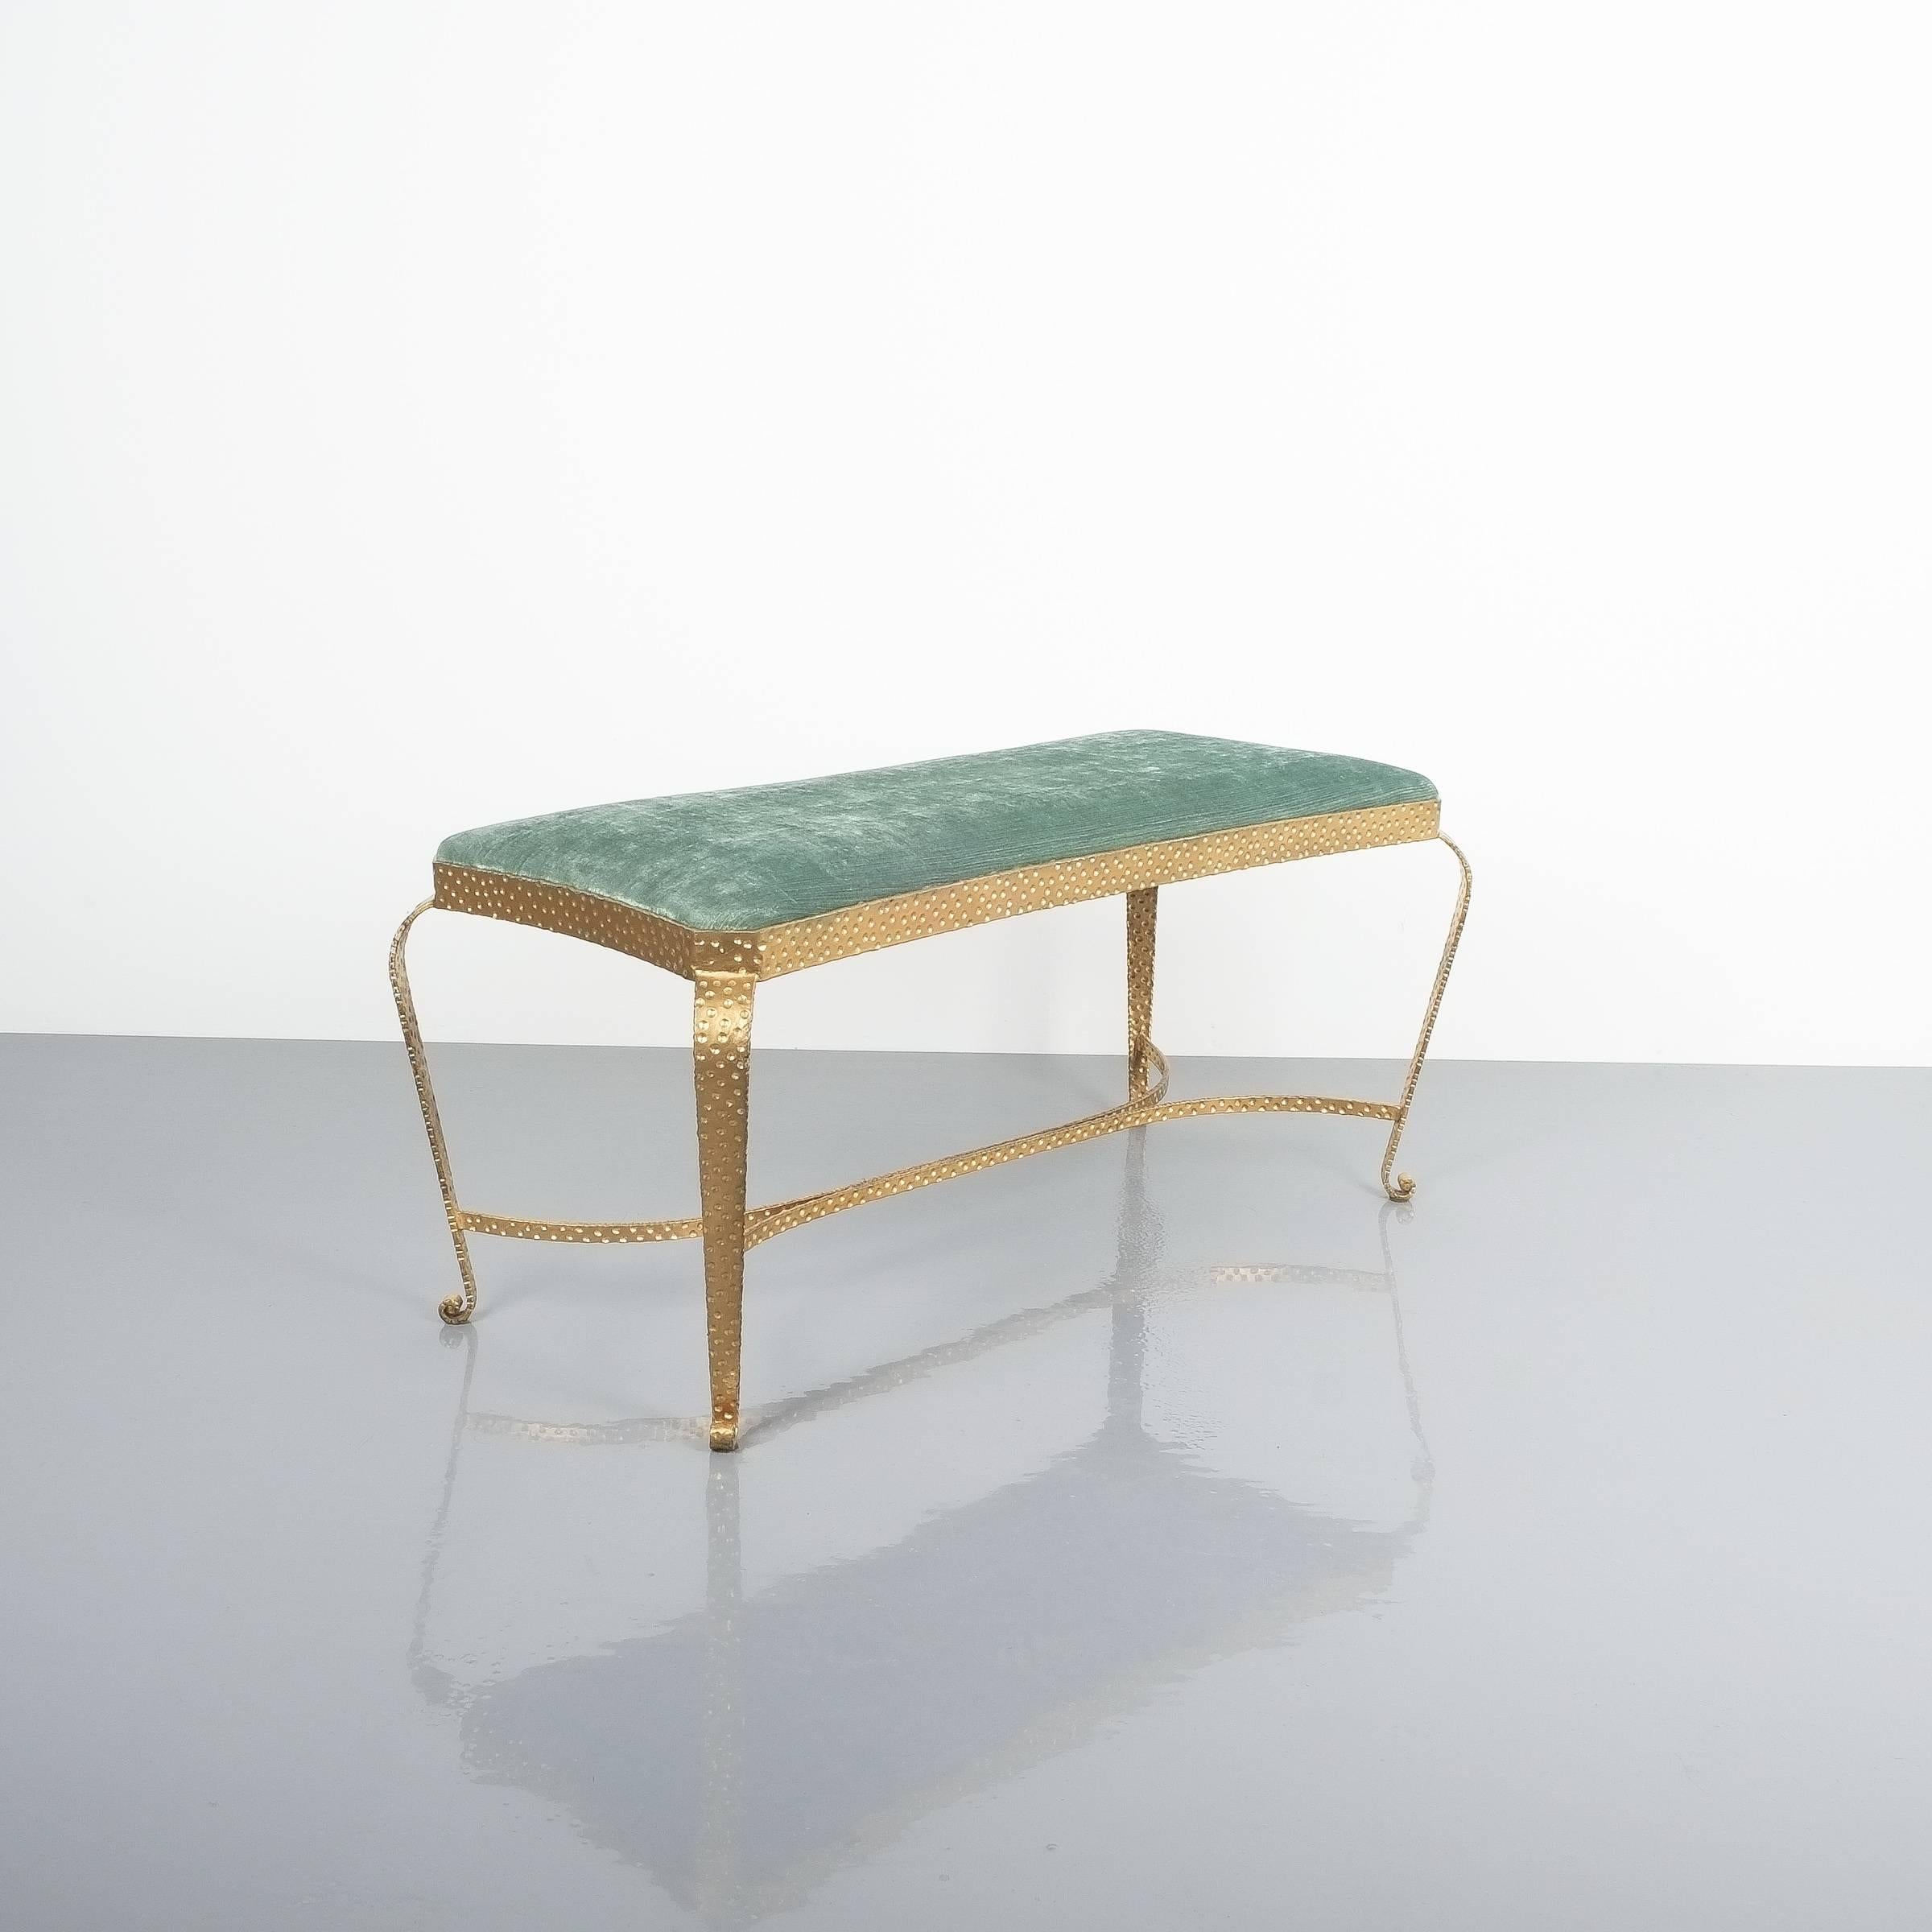 Pier Luigi Colli gold iron bench green fabric, Italy 1950. Large hammered gilt iron bench with green velvet fabric in very good condition. Please note that we the same bench in red available soon.